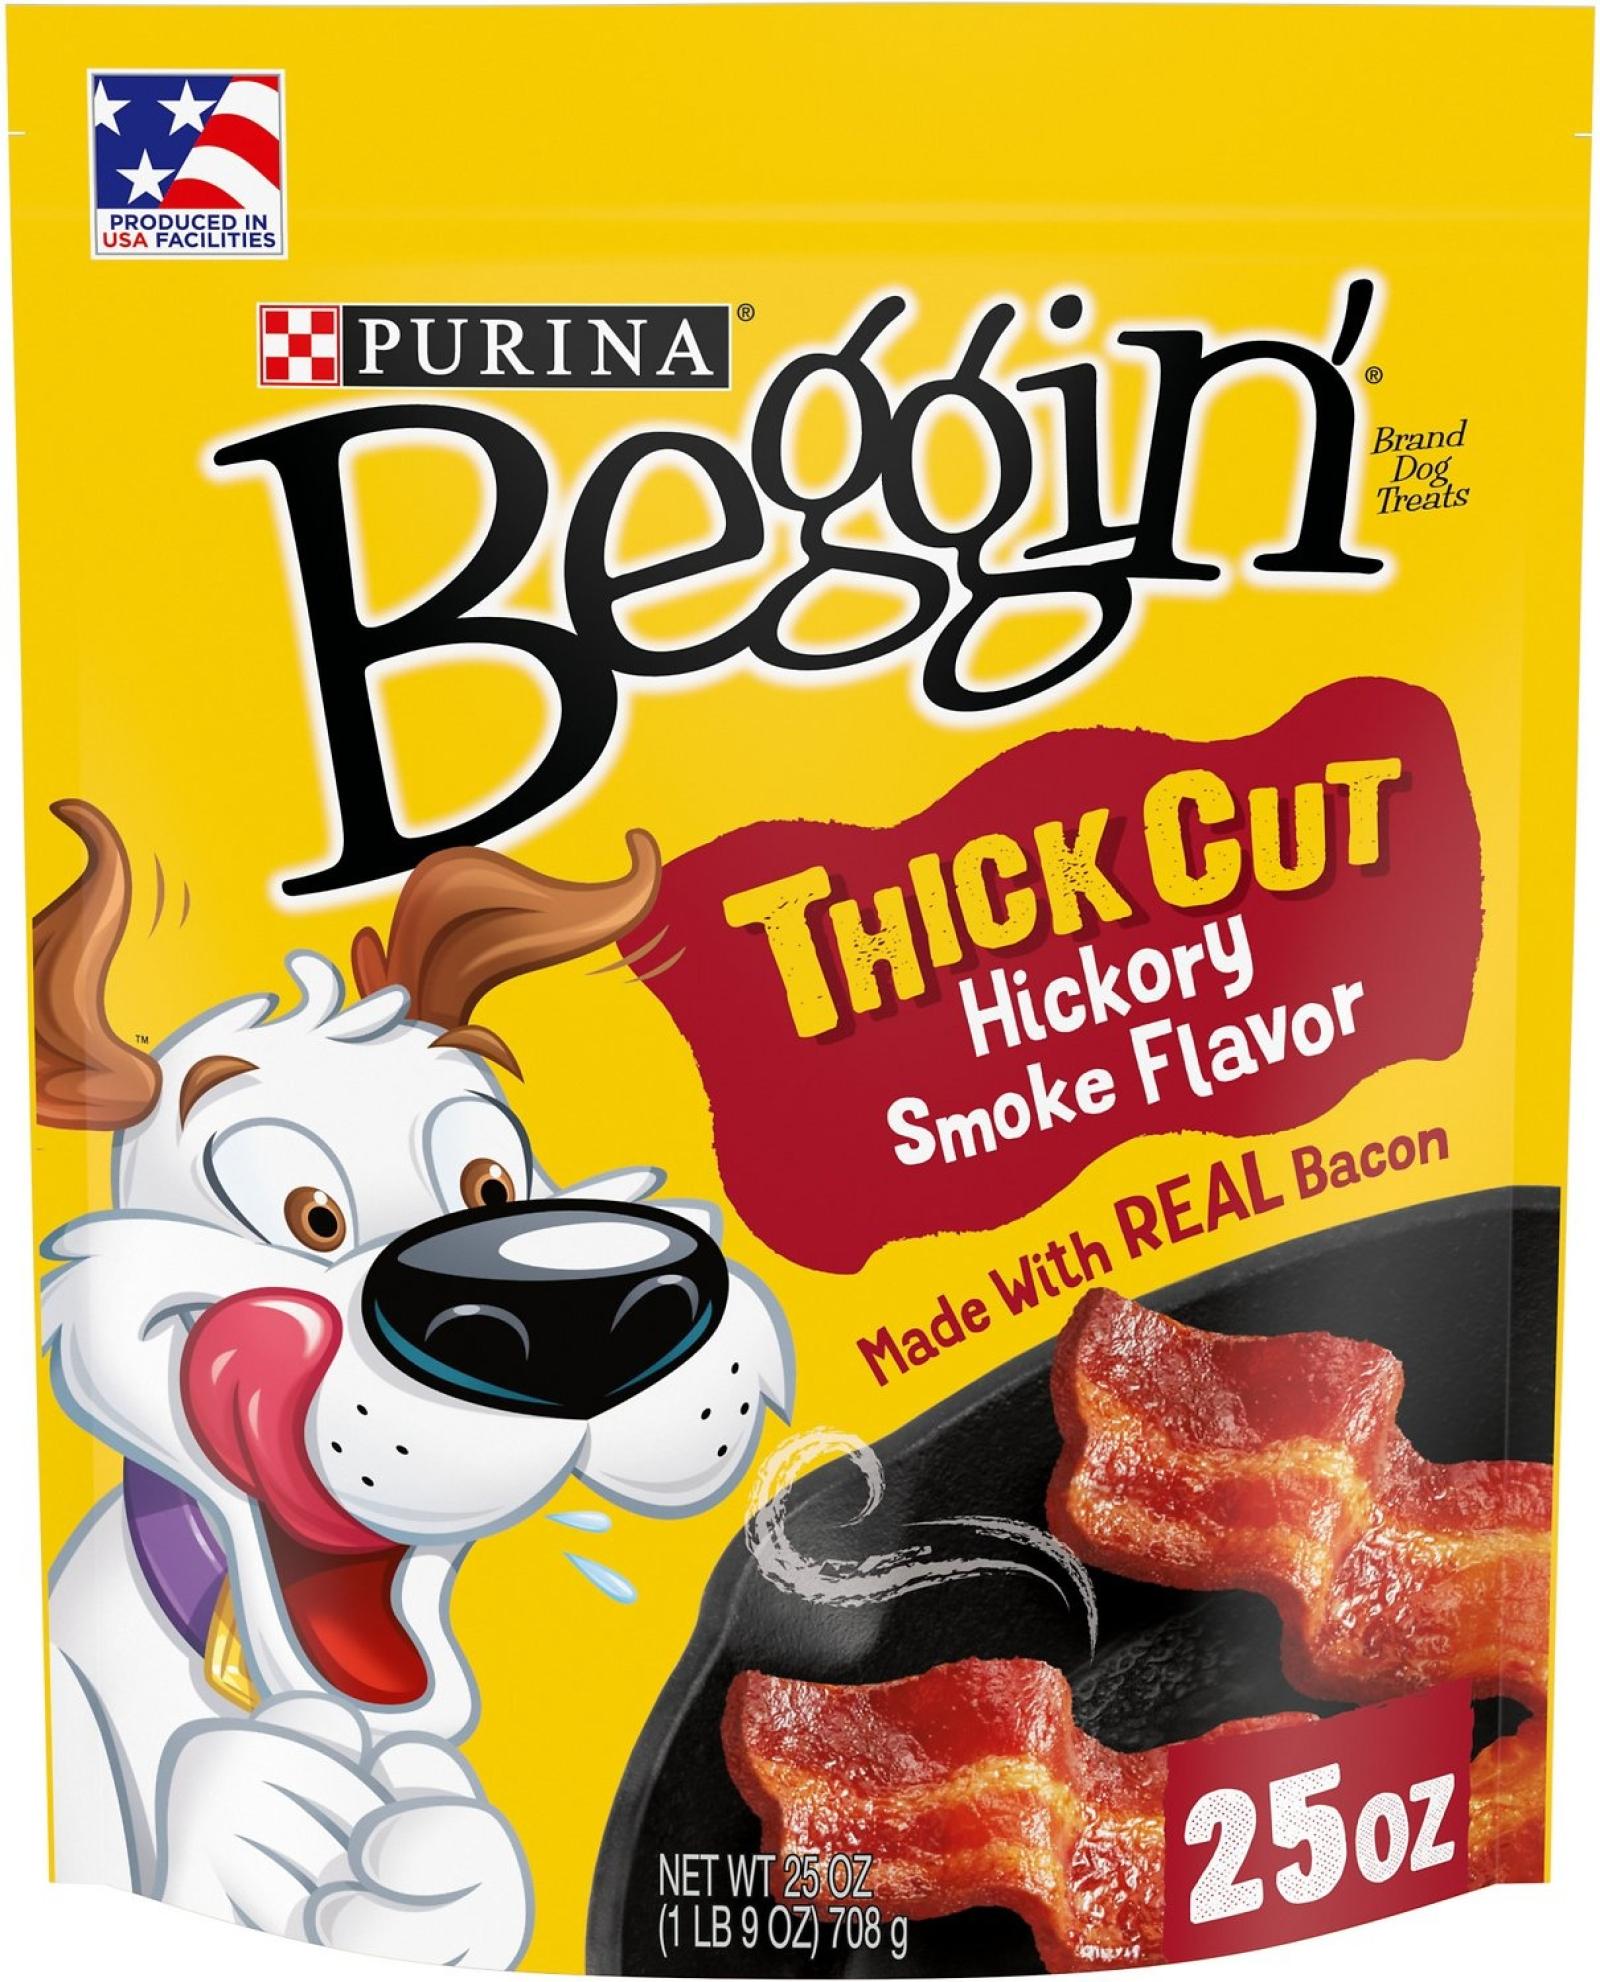 Purina Beggins Strips Thick Cut Hickory Smoked